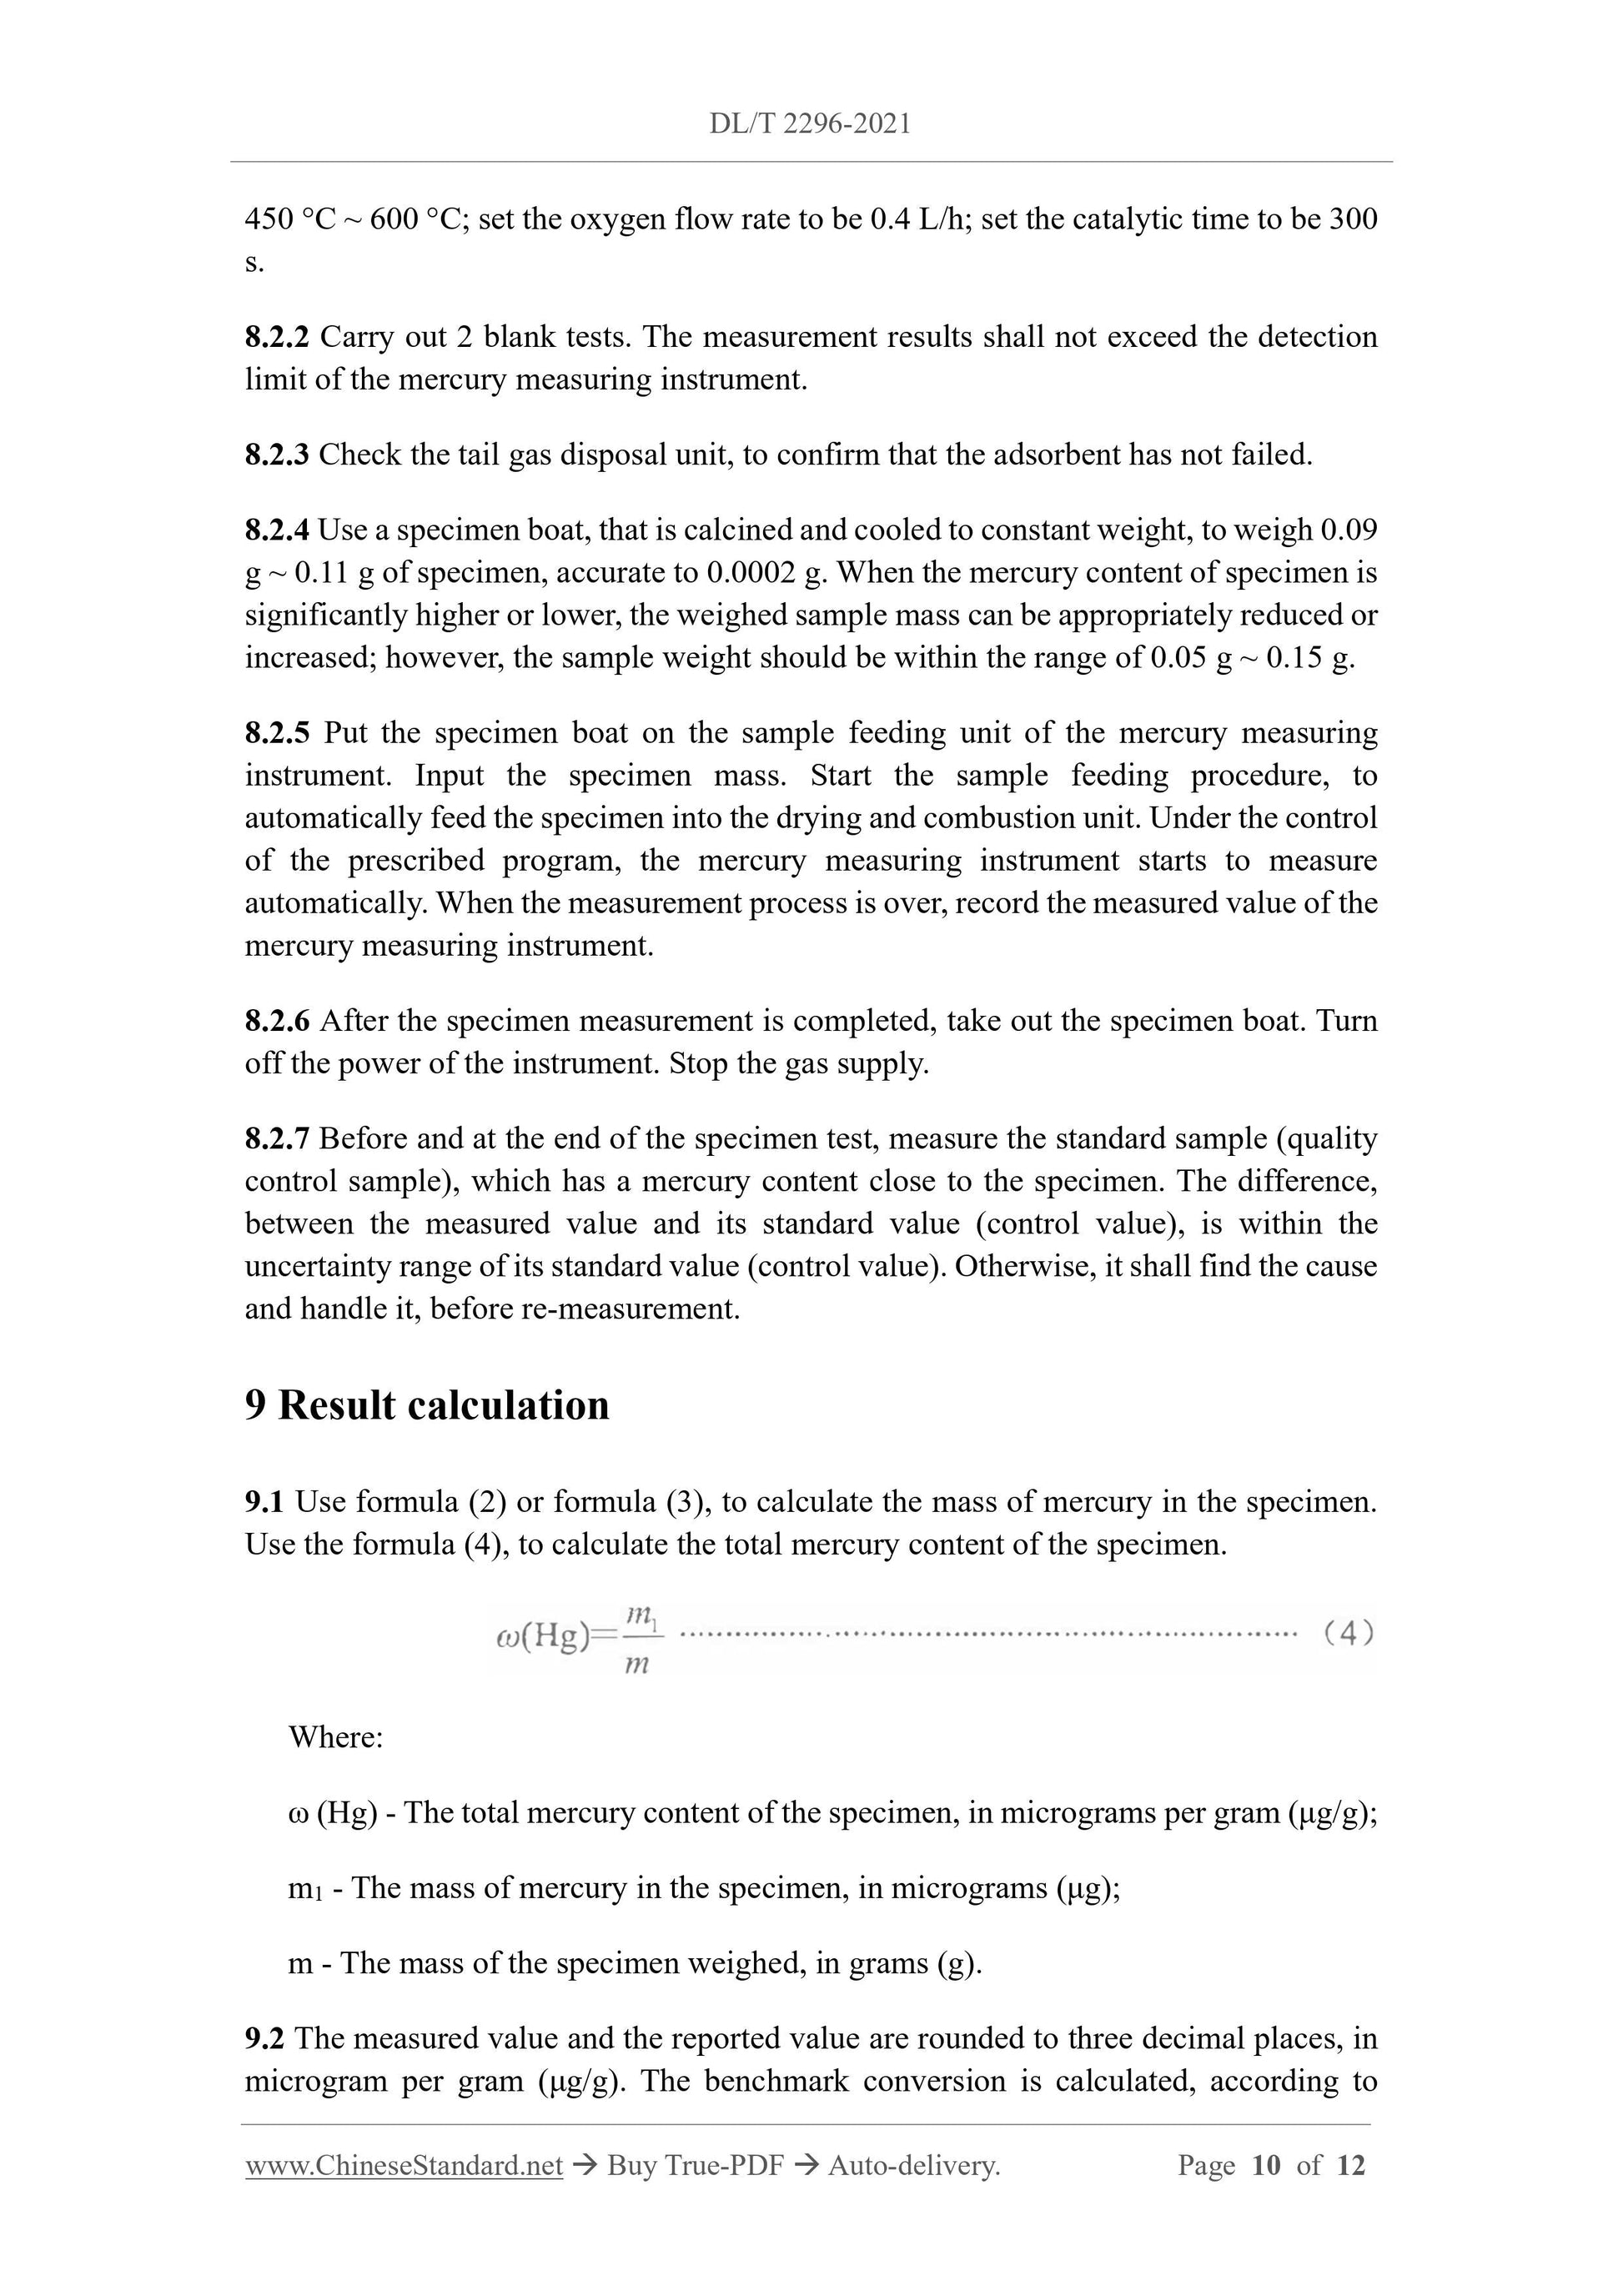 DL/T 2296-2021 Page 7